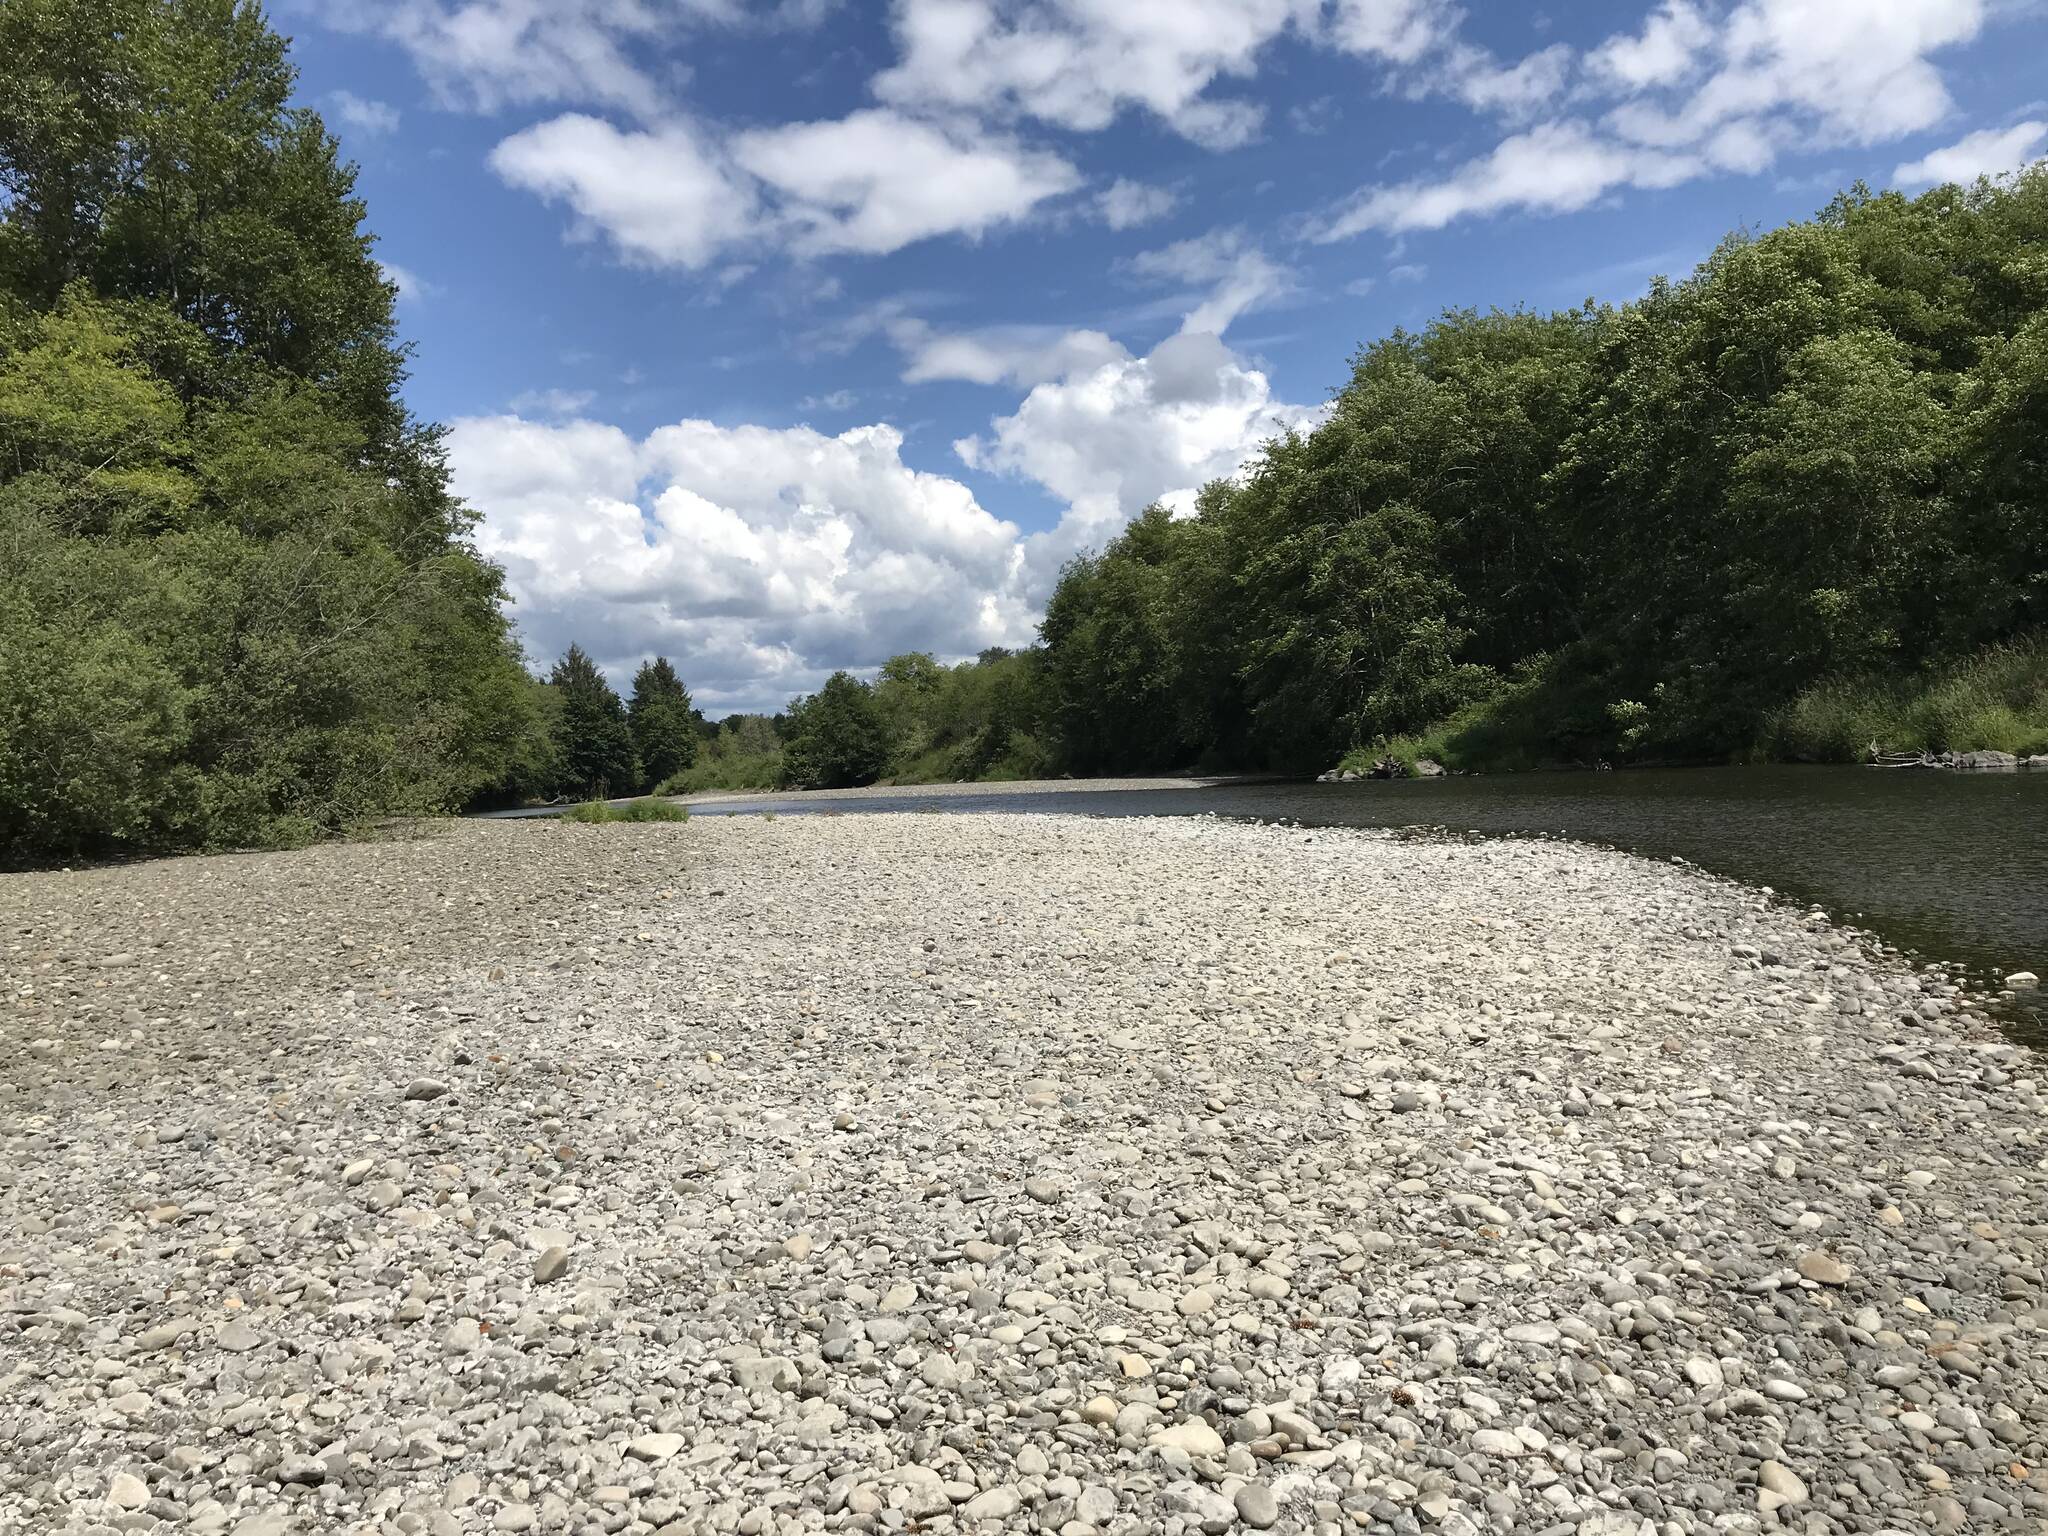 Low water conditions on the Humptulips River near the town of Humptulips. This photo is from 2019, when there was a comparatively similar dry spring and summer in Grays Harbor County. (Courtesy Department of Ecology)